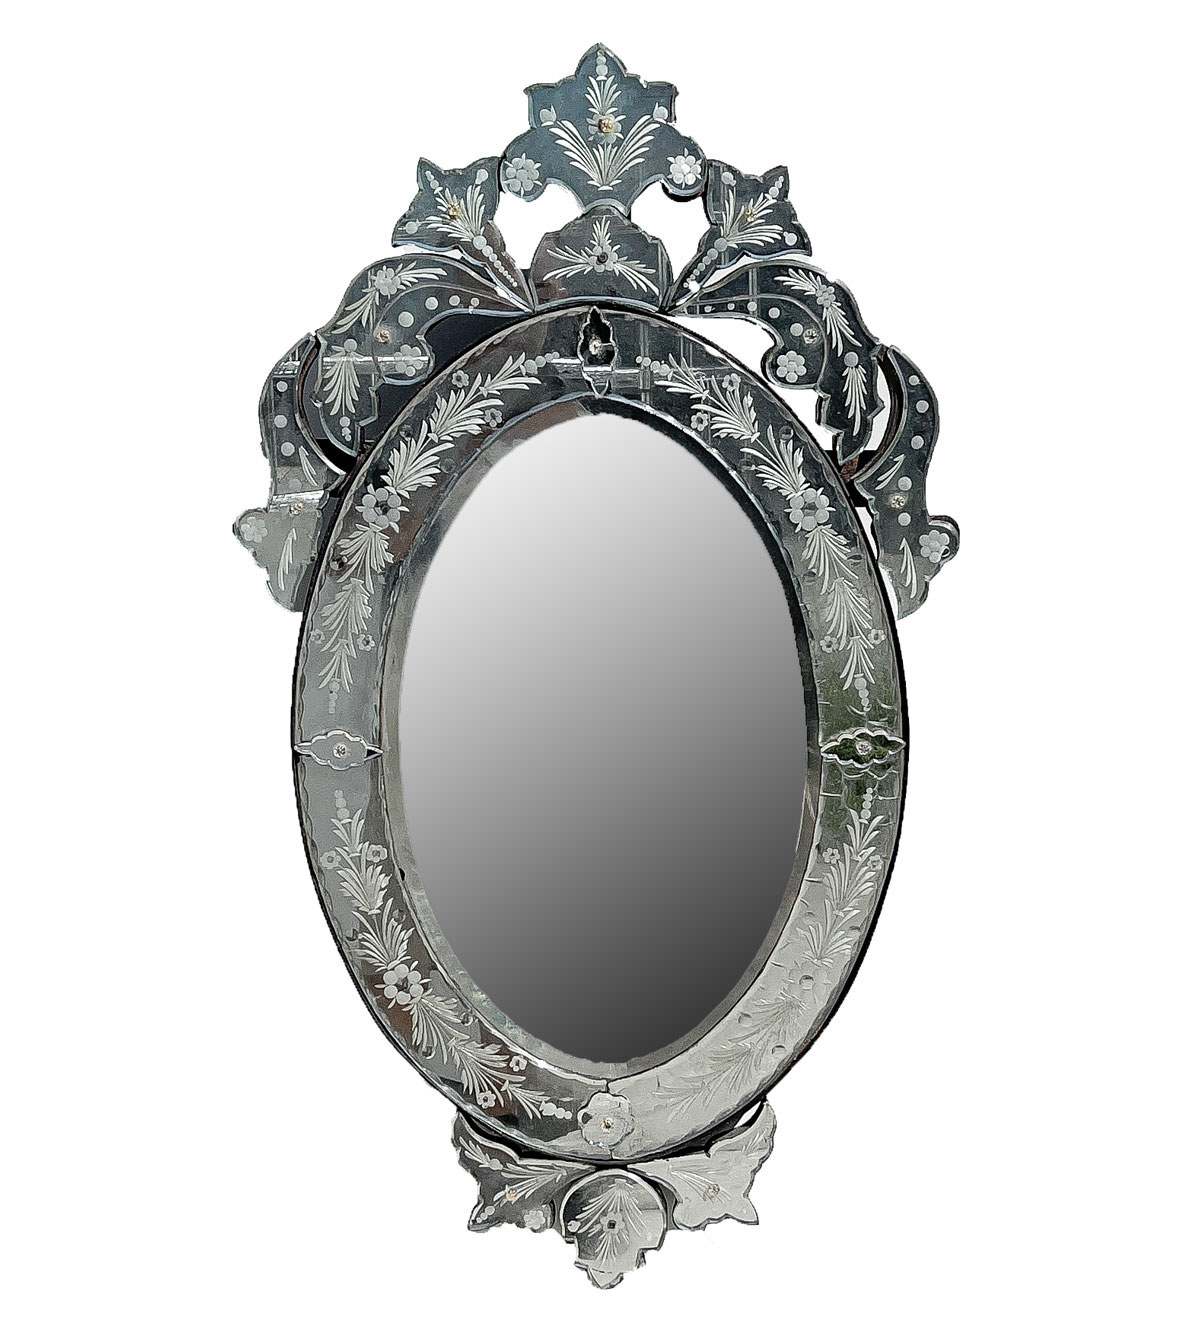 ETCHED VENETIAN MIRROR: Beveled